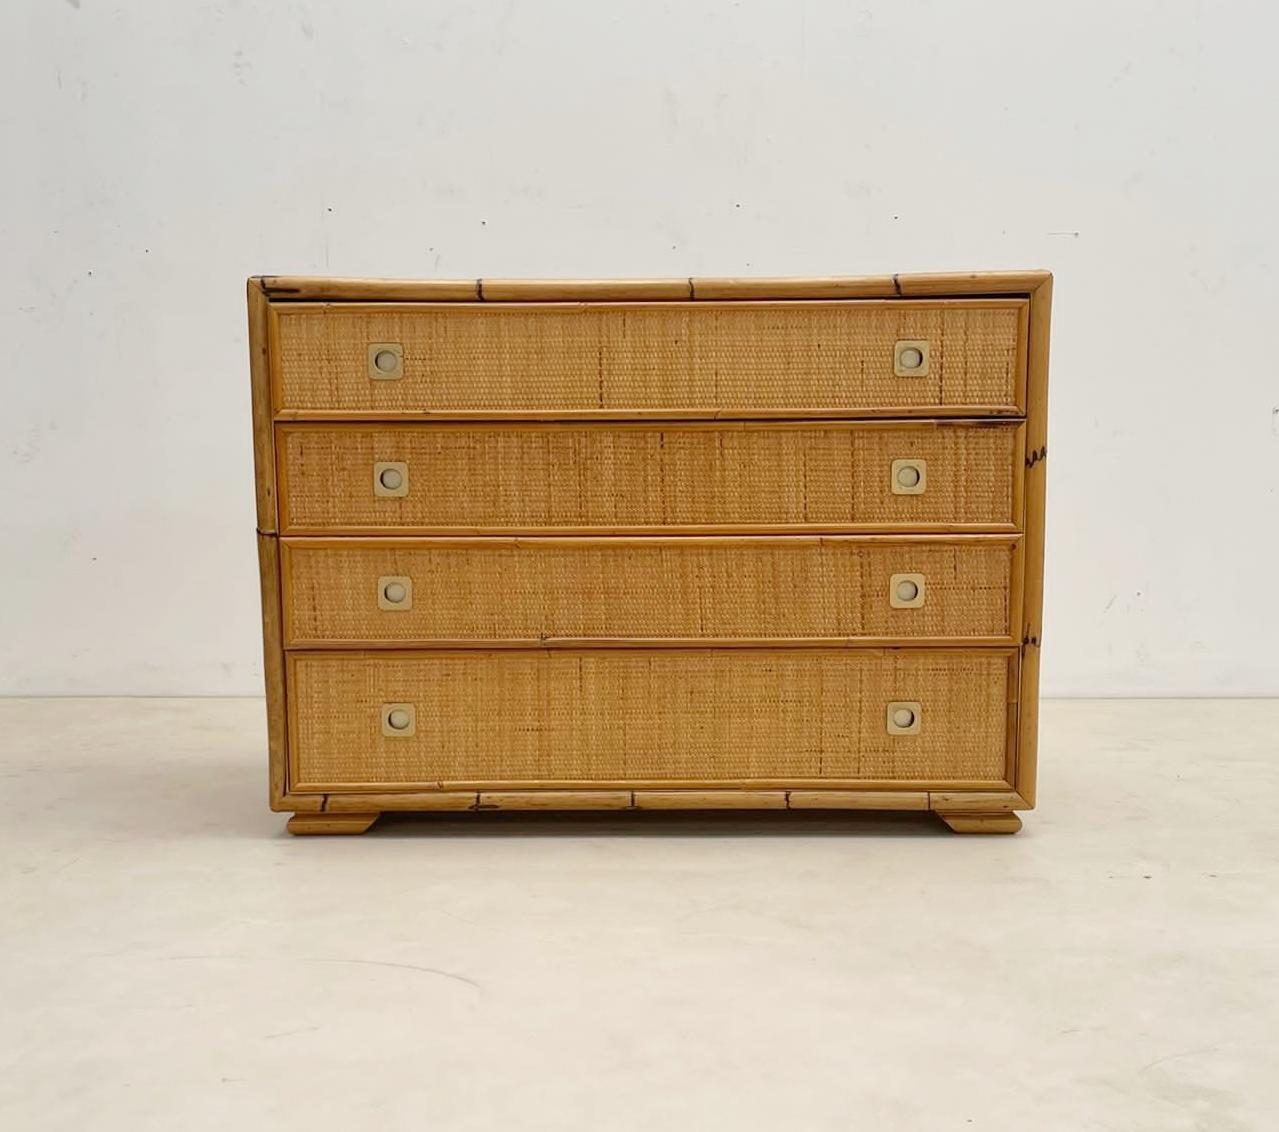 Dal Vera bamboo and wicker/rattan chest of drawers - Italy 1960s.